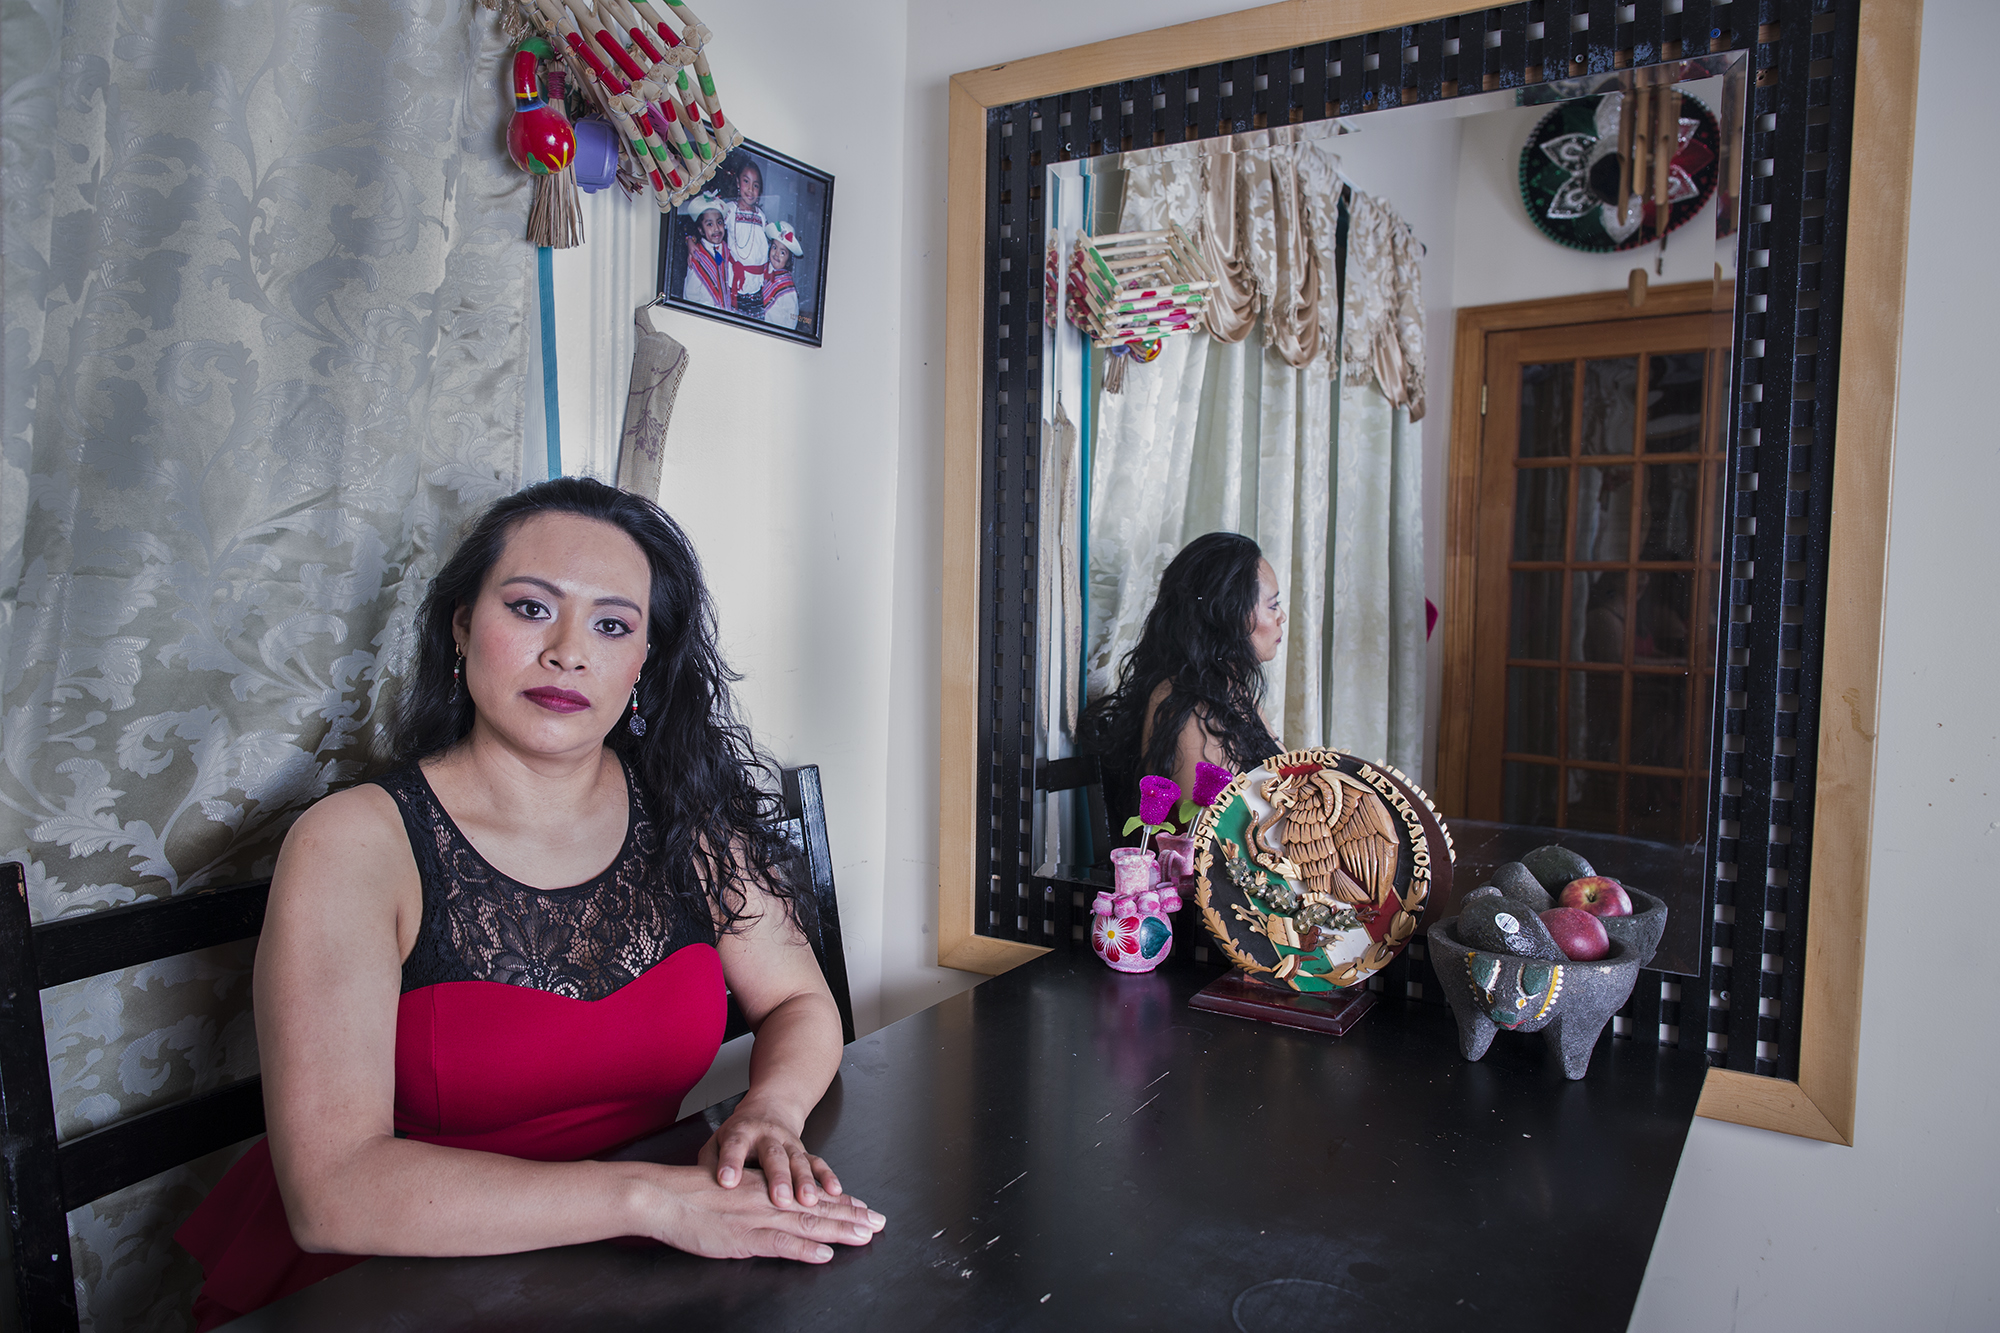  Magda Gutierrez, born in the state of Tlaxcala, México, migrated to New York 22 years ago. She has three children and a granddaughter born in the USA. Magda has been part of several community organizations working for the rights of immigrants in Sun